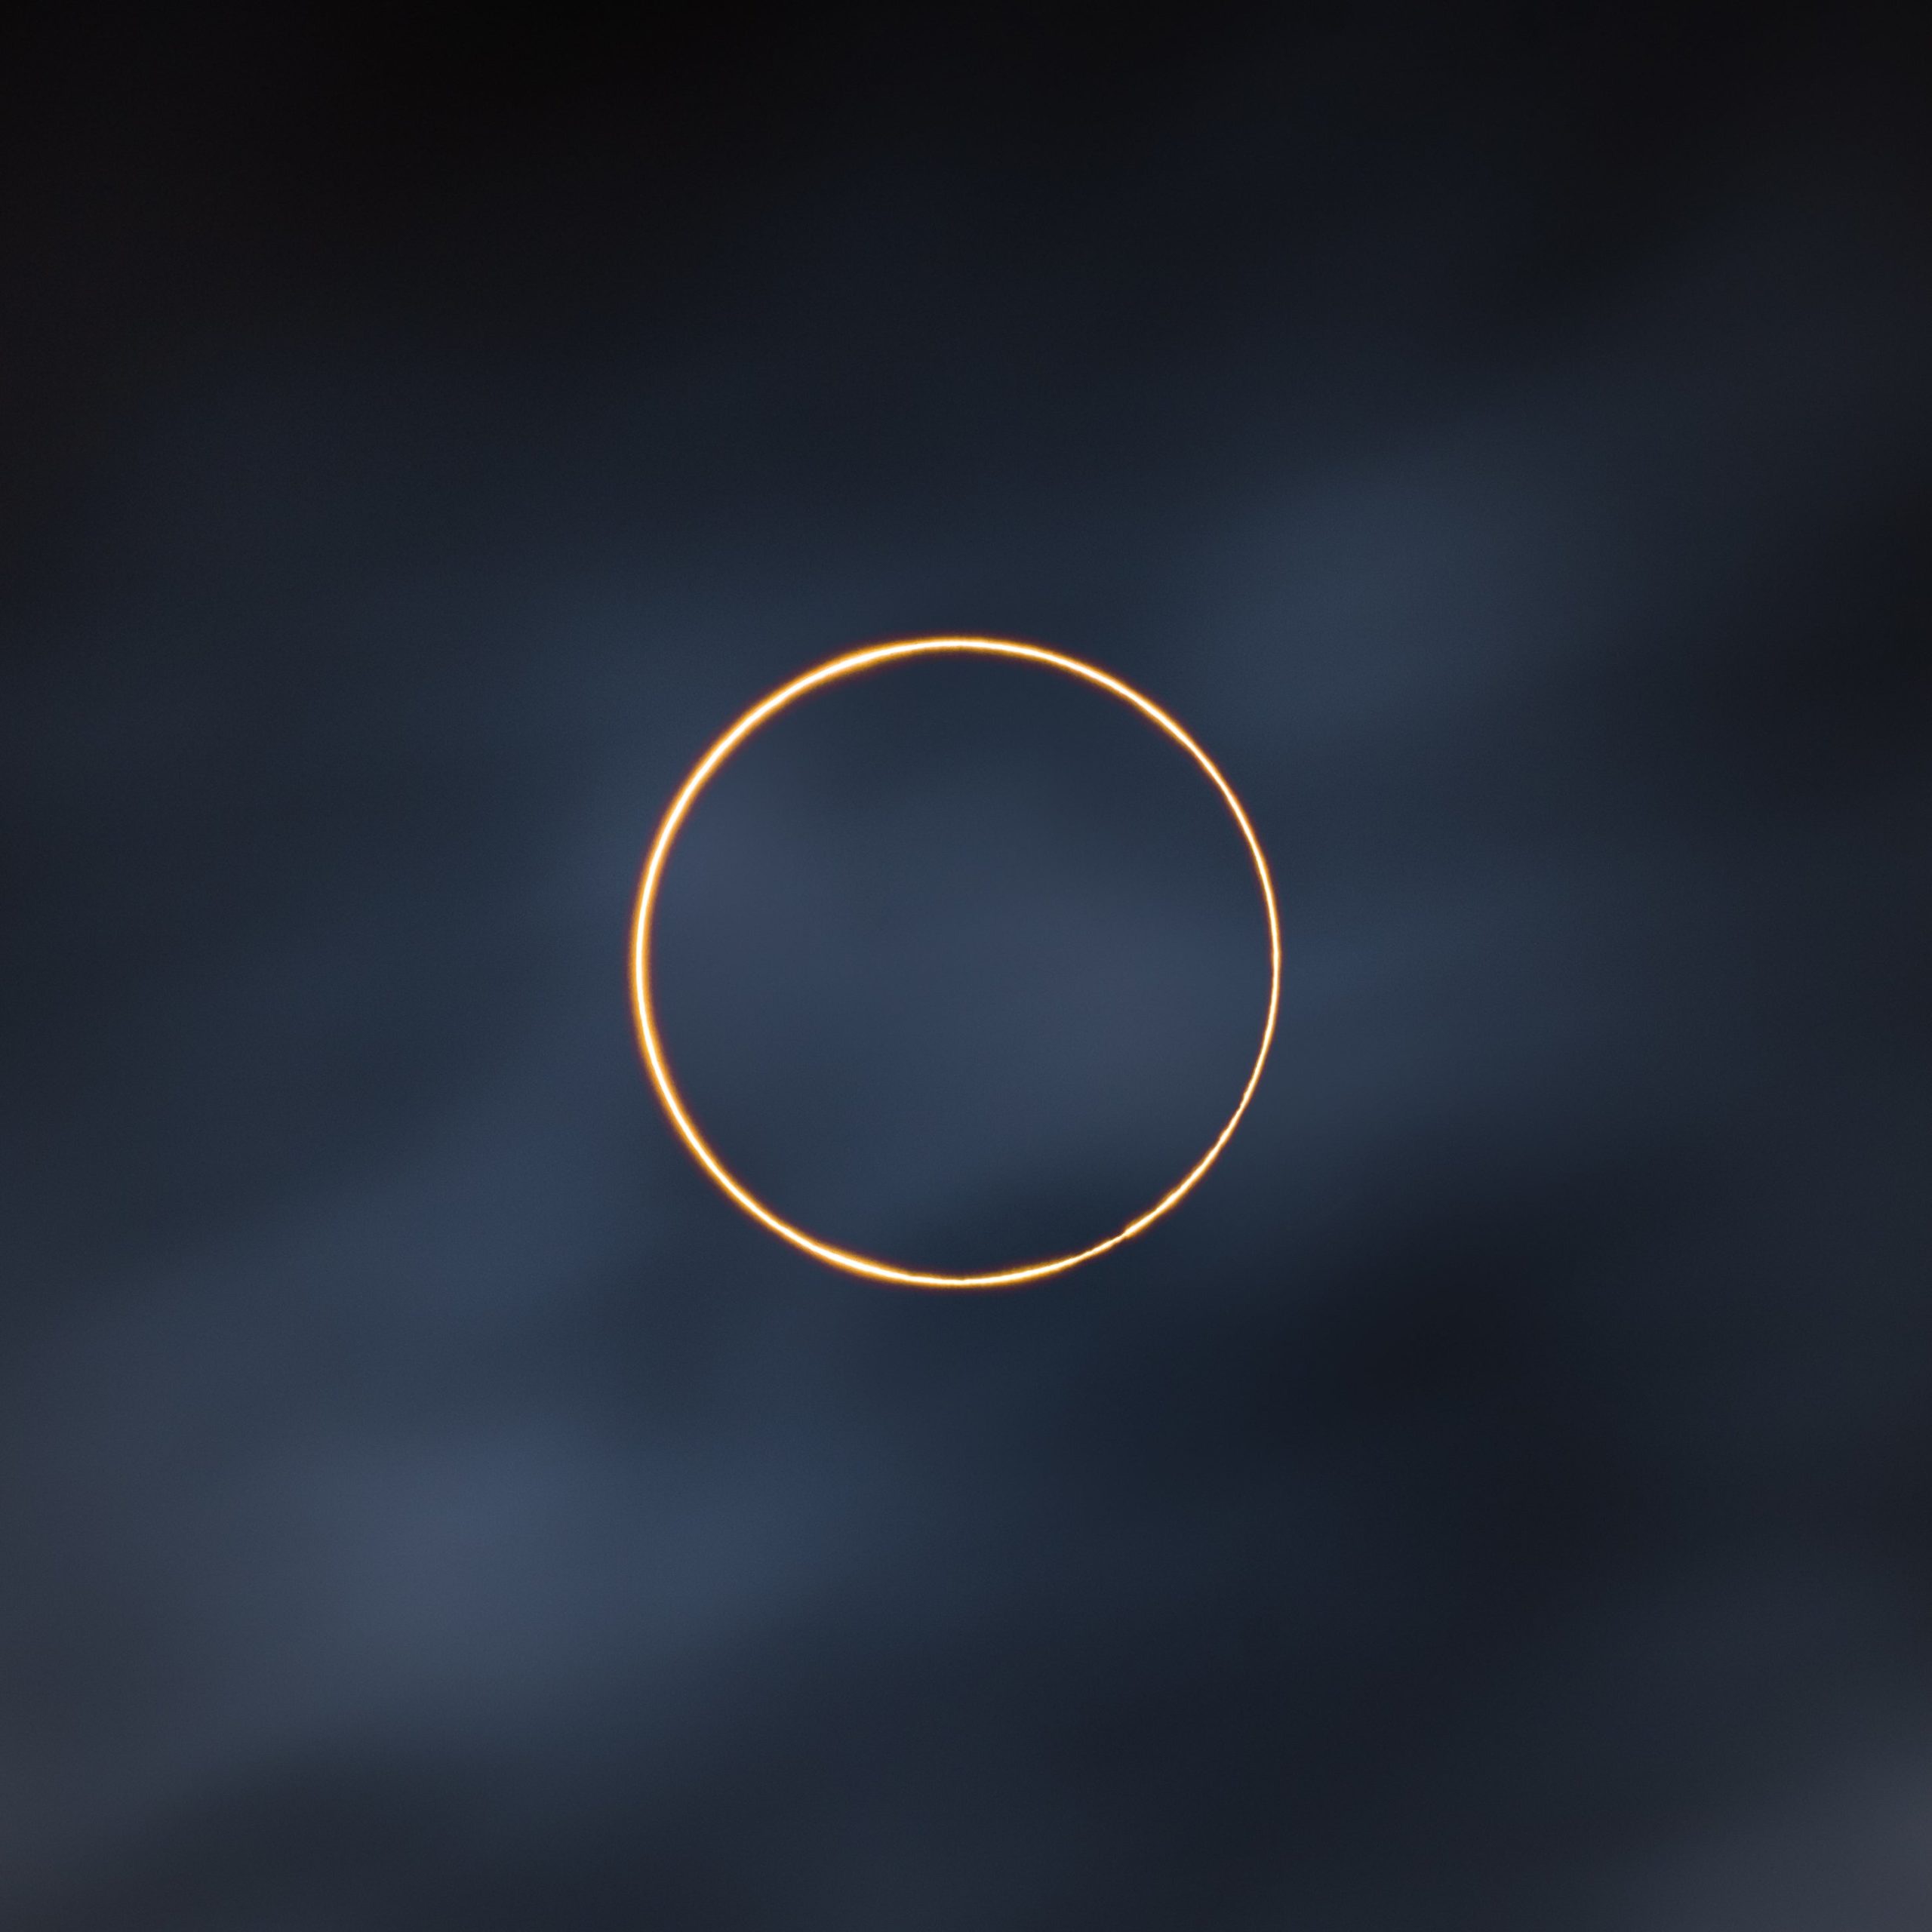 The annular eclipse of the Sun in June 2021 took the grand prize. (Photo: Shuchang Dong)